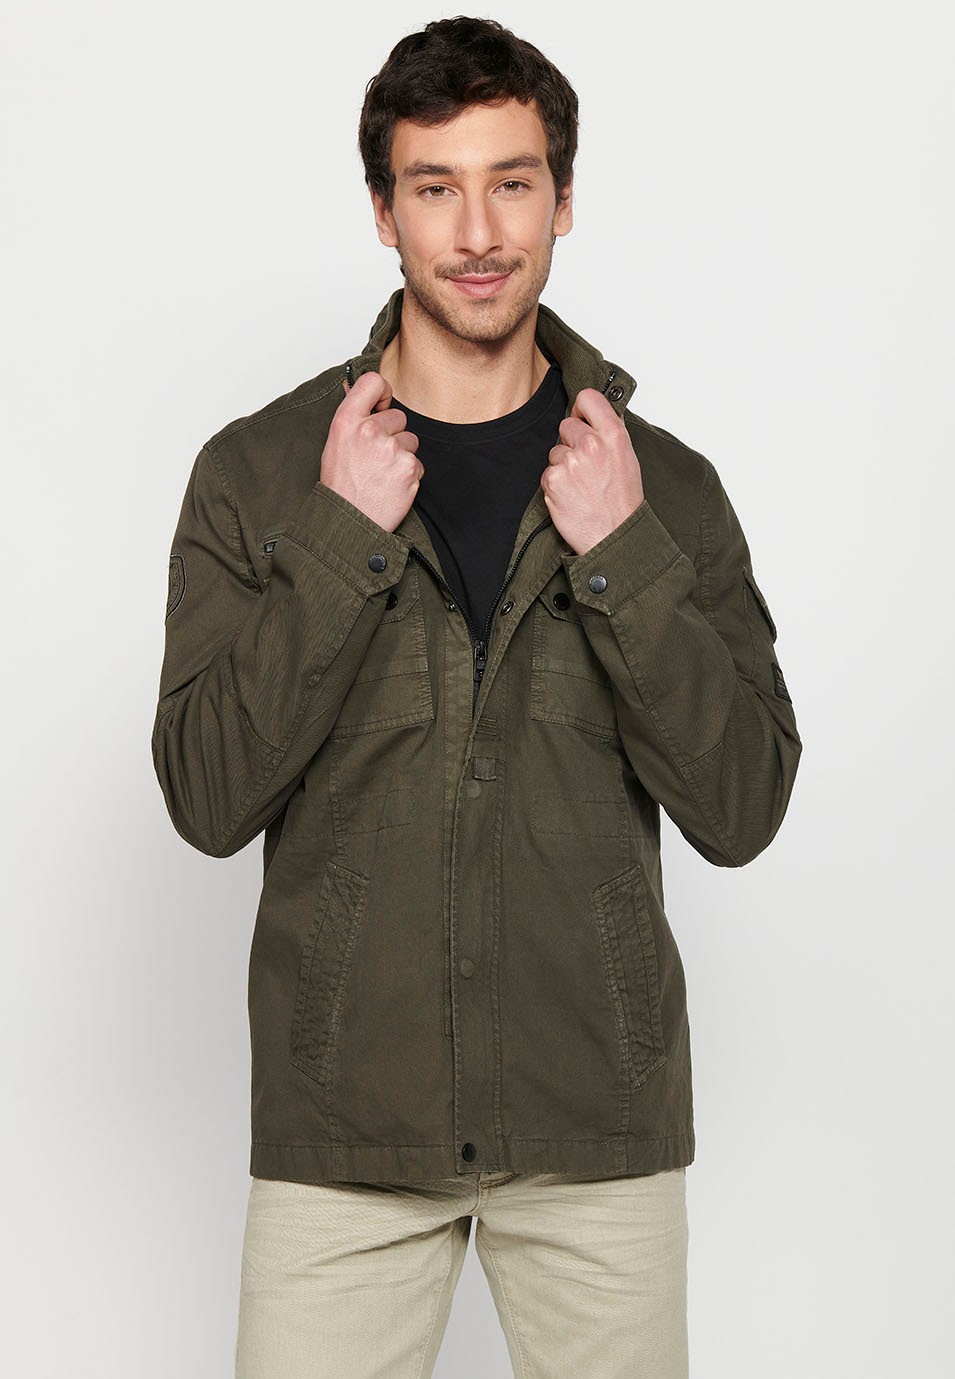 Long Jacket with Zipper Front Closure and Lapel with Stand Collar and Flap Pockets in Olive Color for Men 3